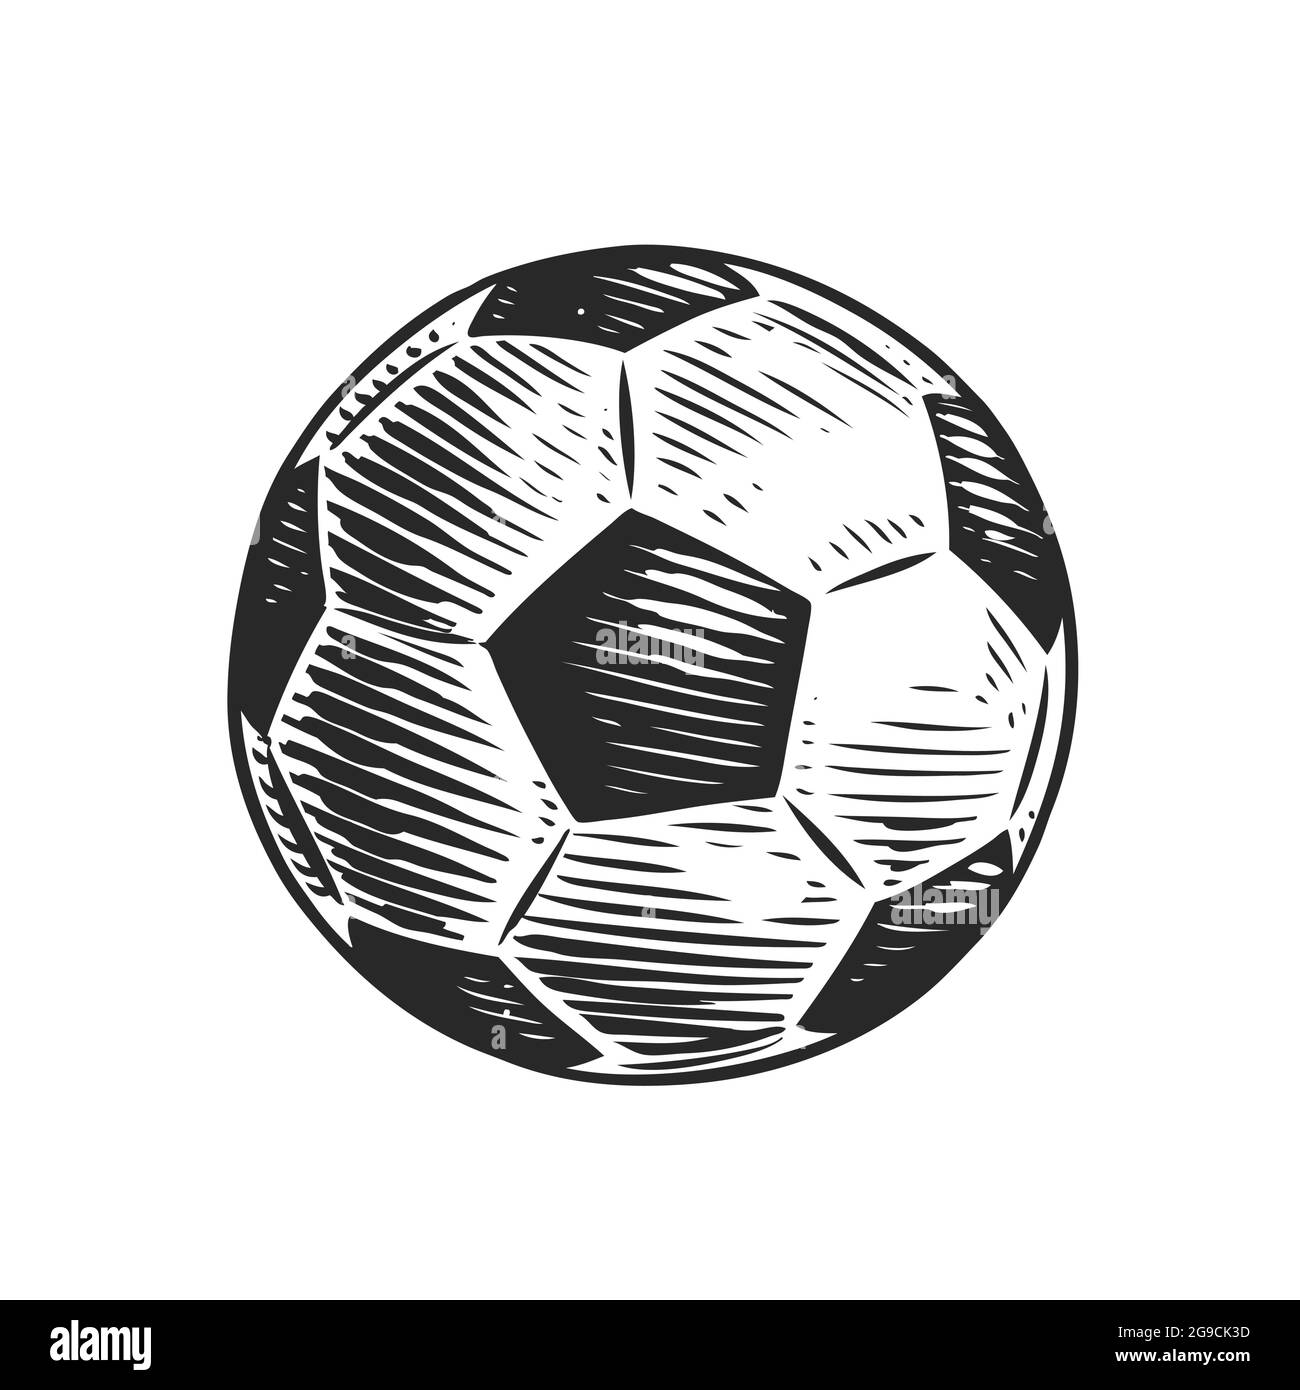 Football Ball On White Hand Drawn Sketch In Vintage Style Vector Illustration Stock Vector Image Art Alamy